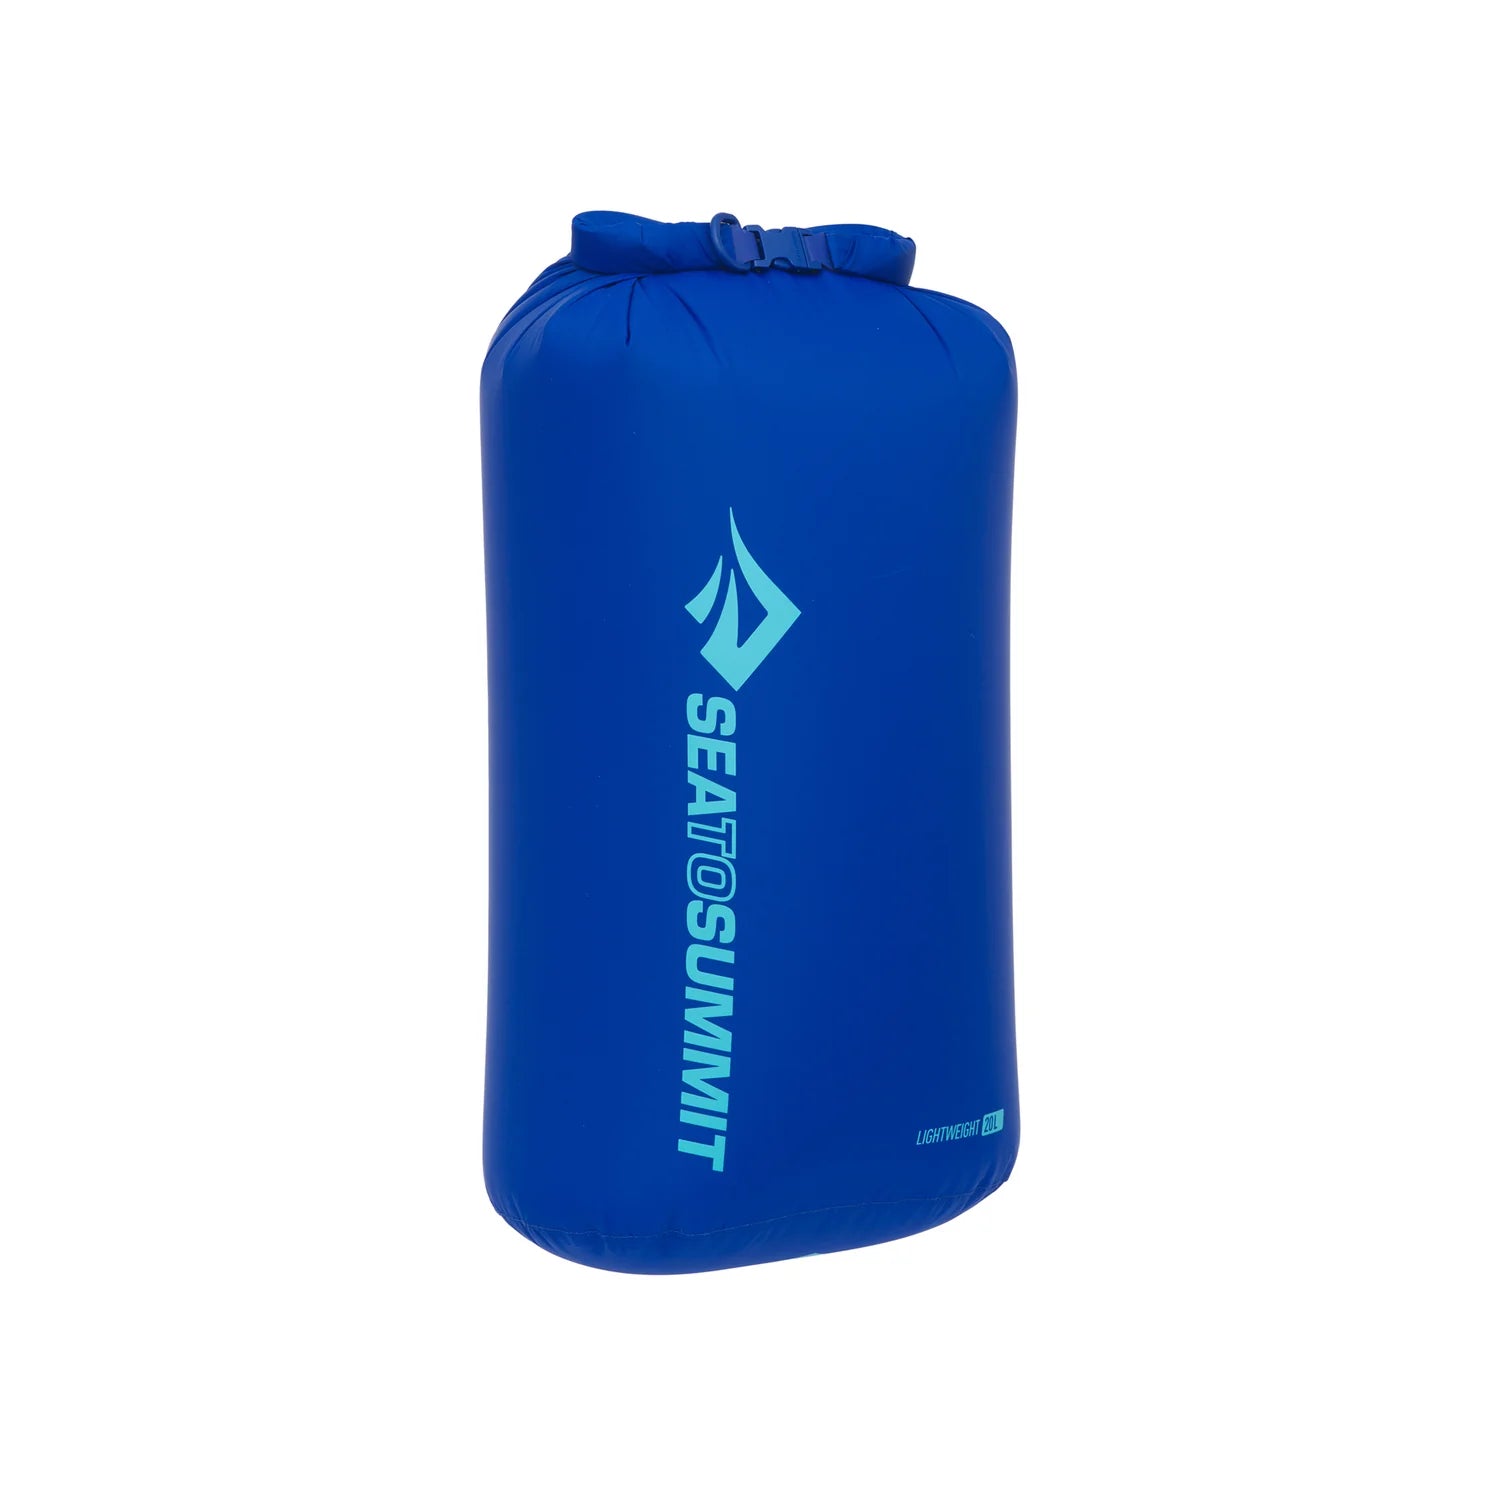 Sea to Summit - Lightweight Dry Bag 20L - Surf the Web